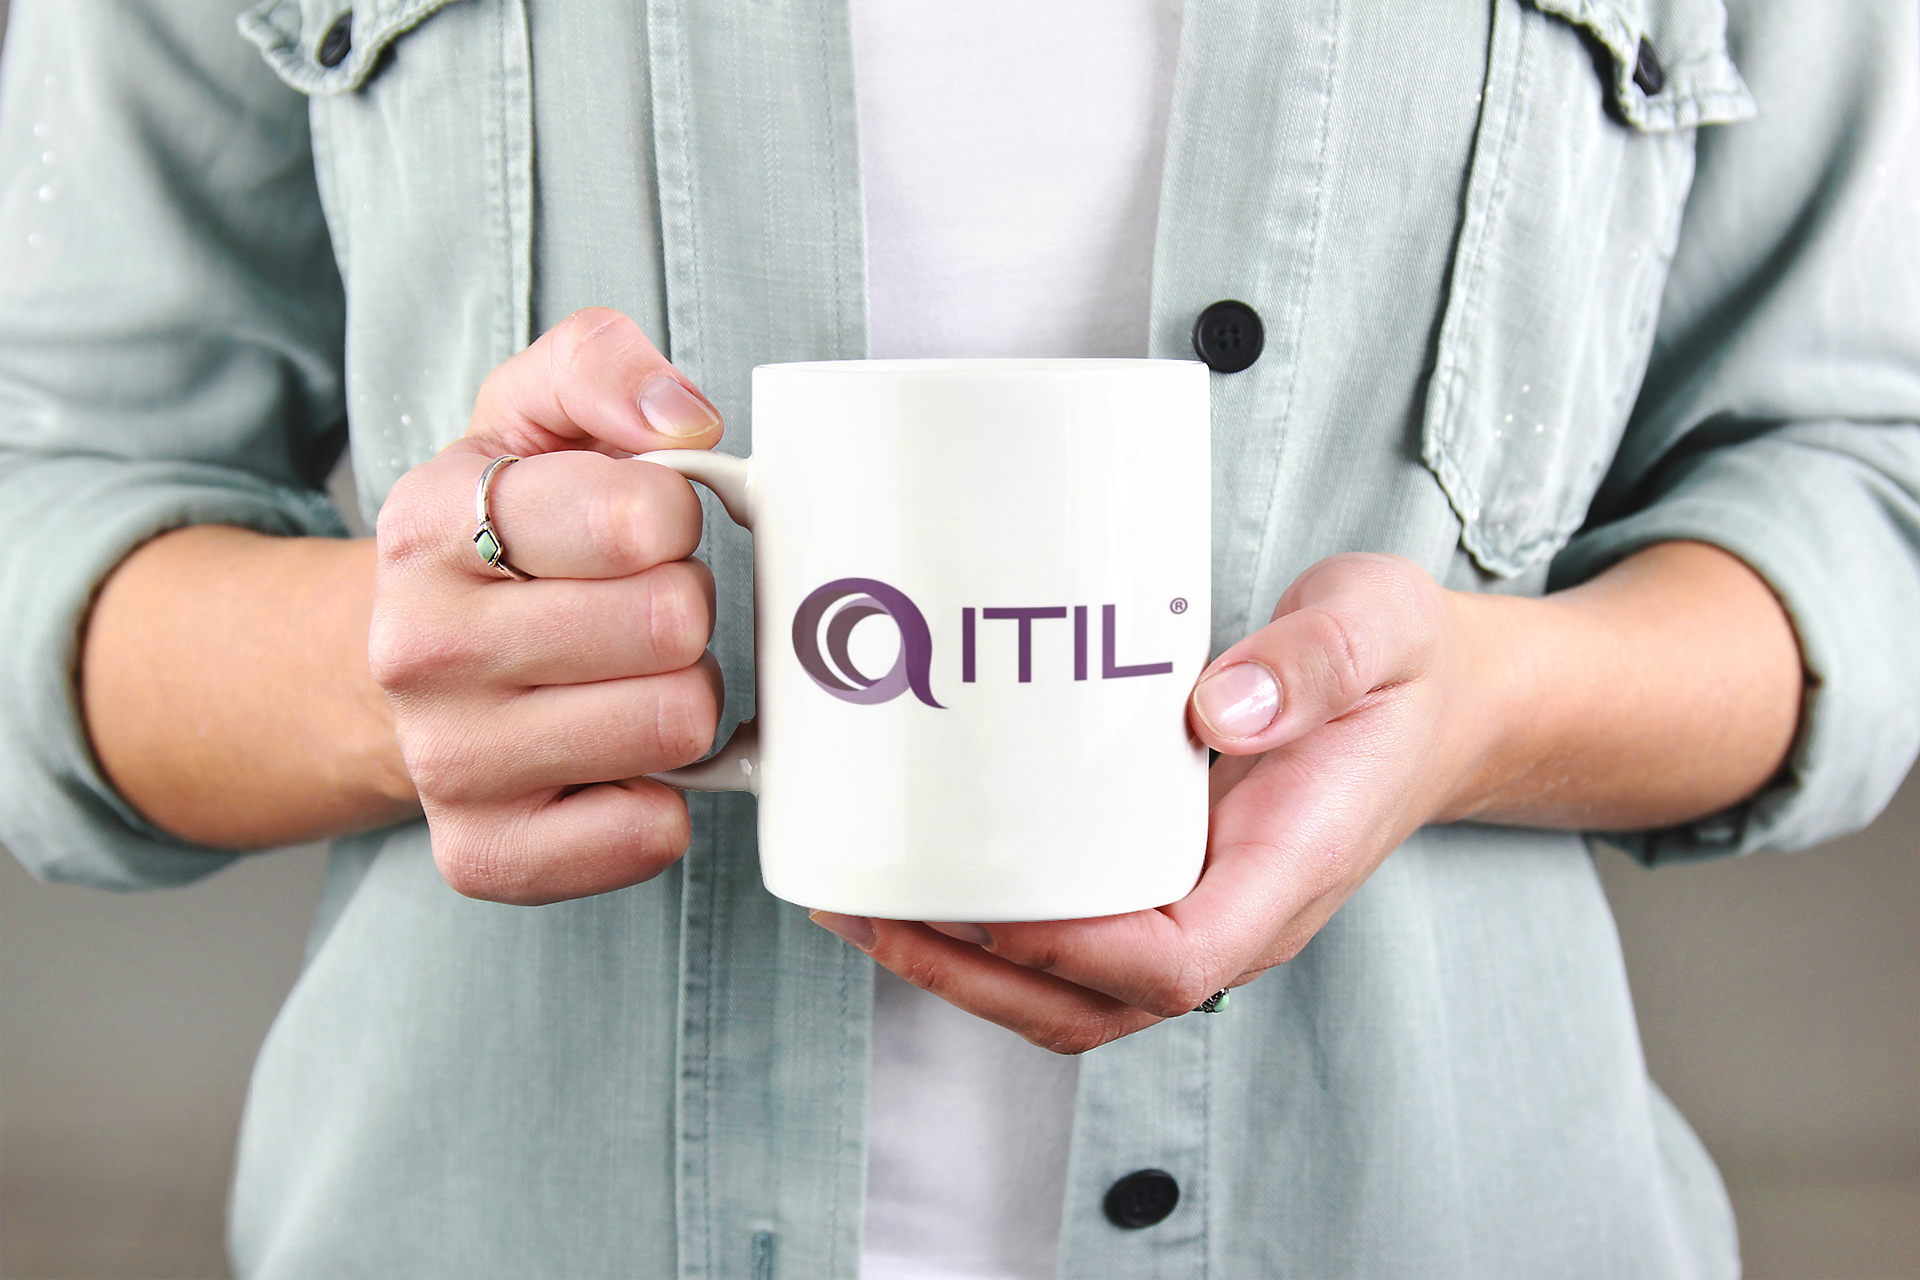 What You Need To Know About The ITIL 4 Update